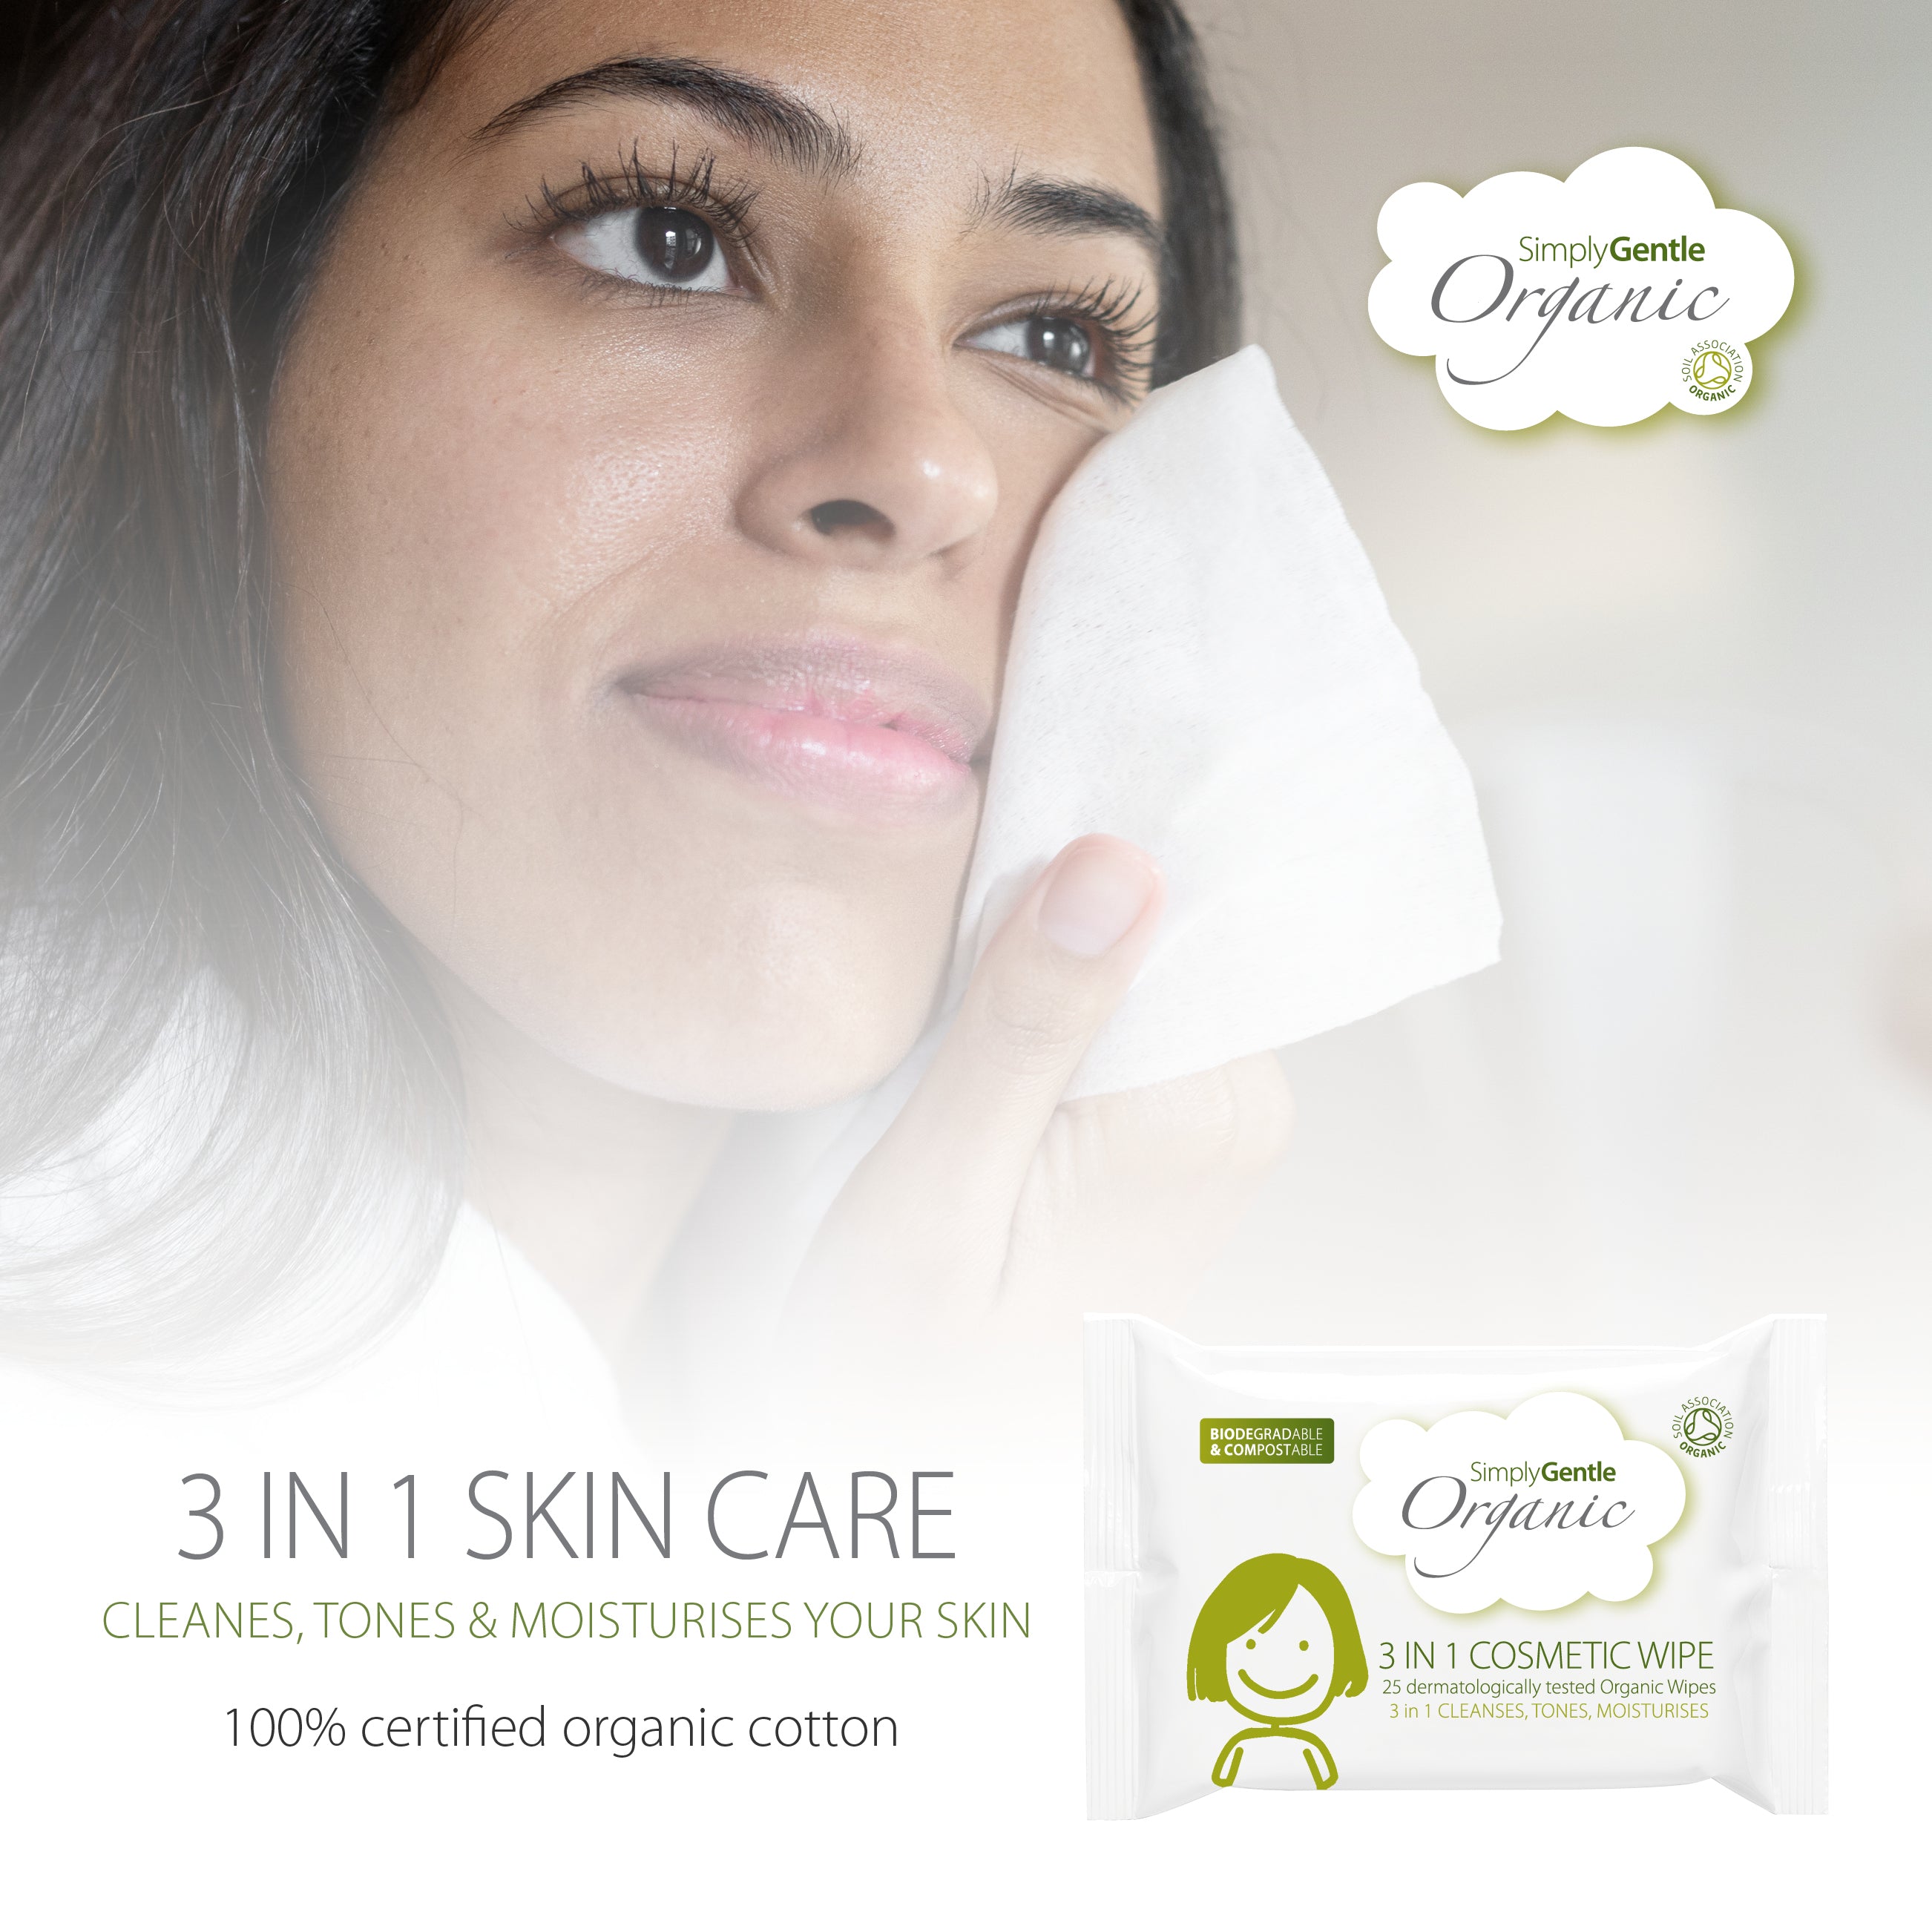 Simply Gentle Organic 3 in 1 Cosmetic Wipe made with a gentle organic lotion containing aloe vera, lavender oil, and a range of flower oils, our 3 in 1 Cosmetic Wipes cleanse, tone, and moisturise. Soft to use, and with a beautiful, natural fragrance, they are dermatologically tested. 100% certified organic cotton. Soil Association approved.